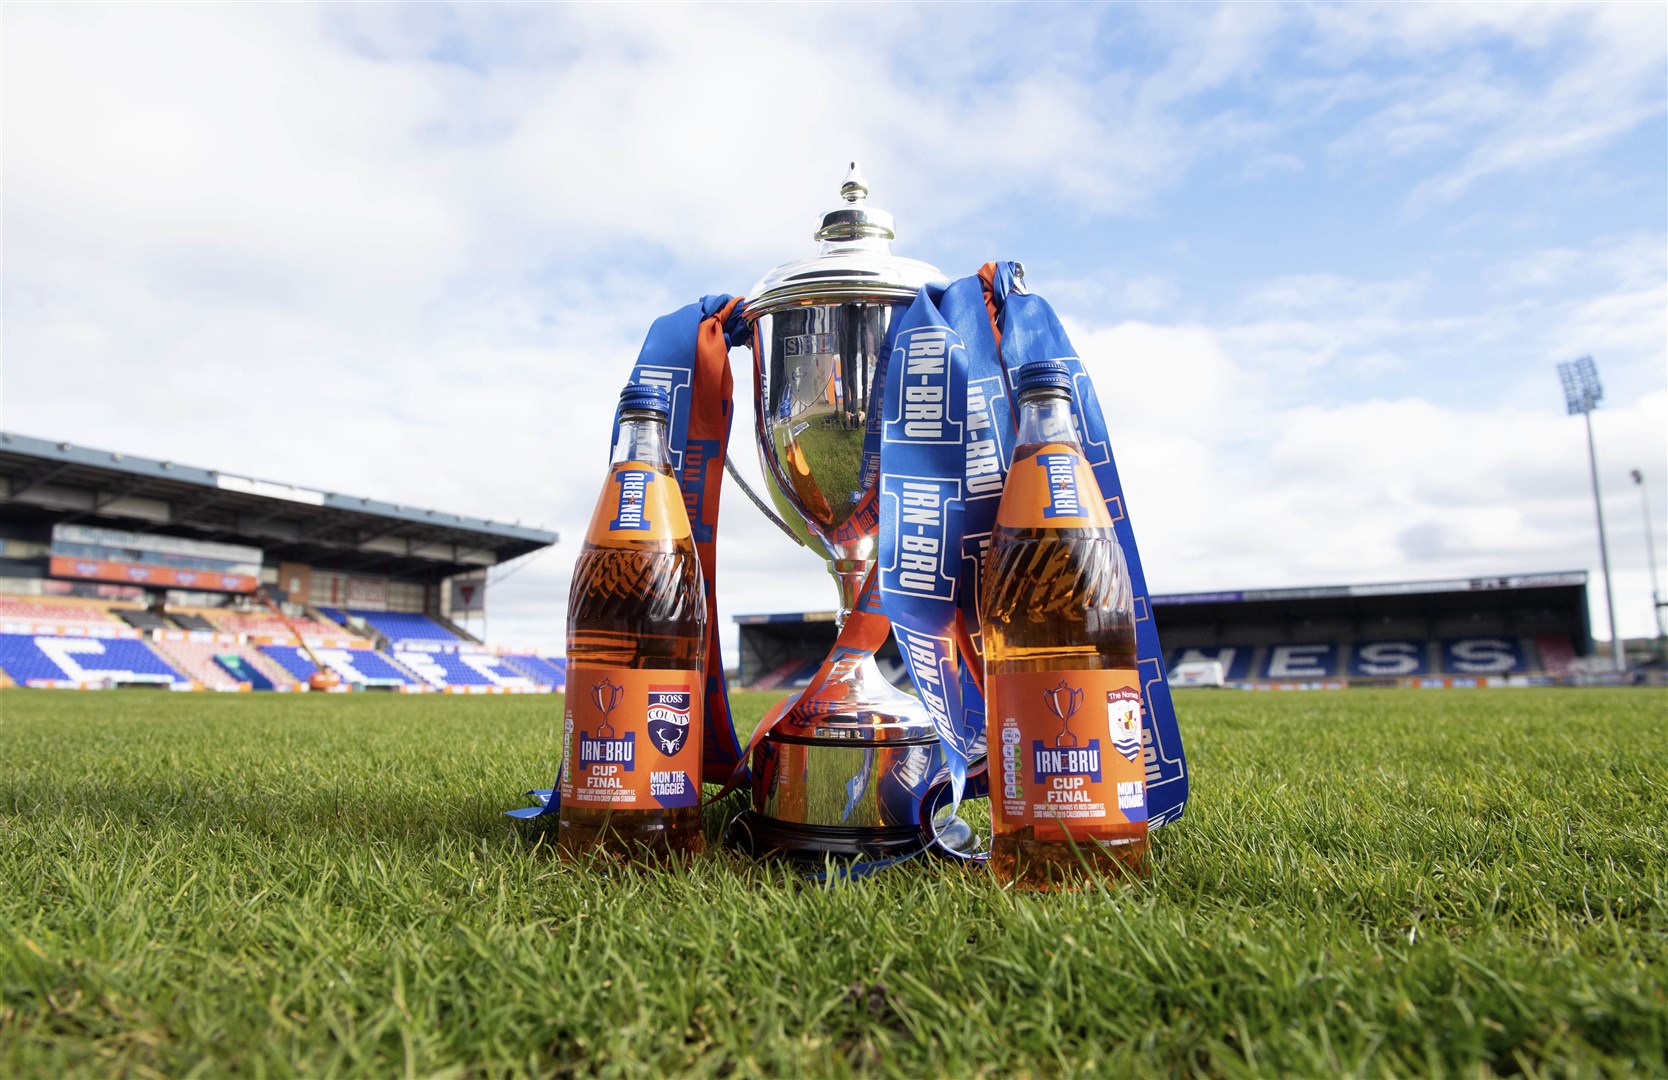 Ross County play Connah's Quay Nomads in the Irn-Bru Cup final at the Caledonian Stadium tomorrow afternoon.